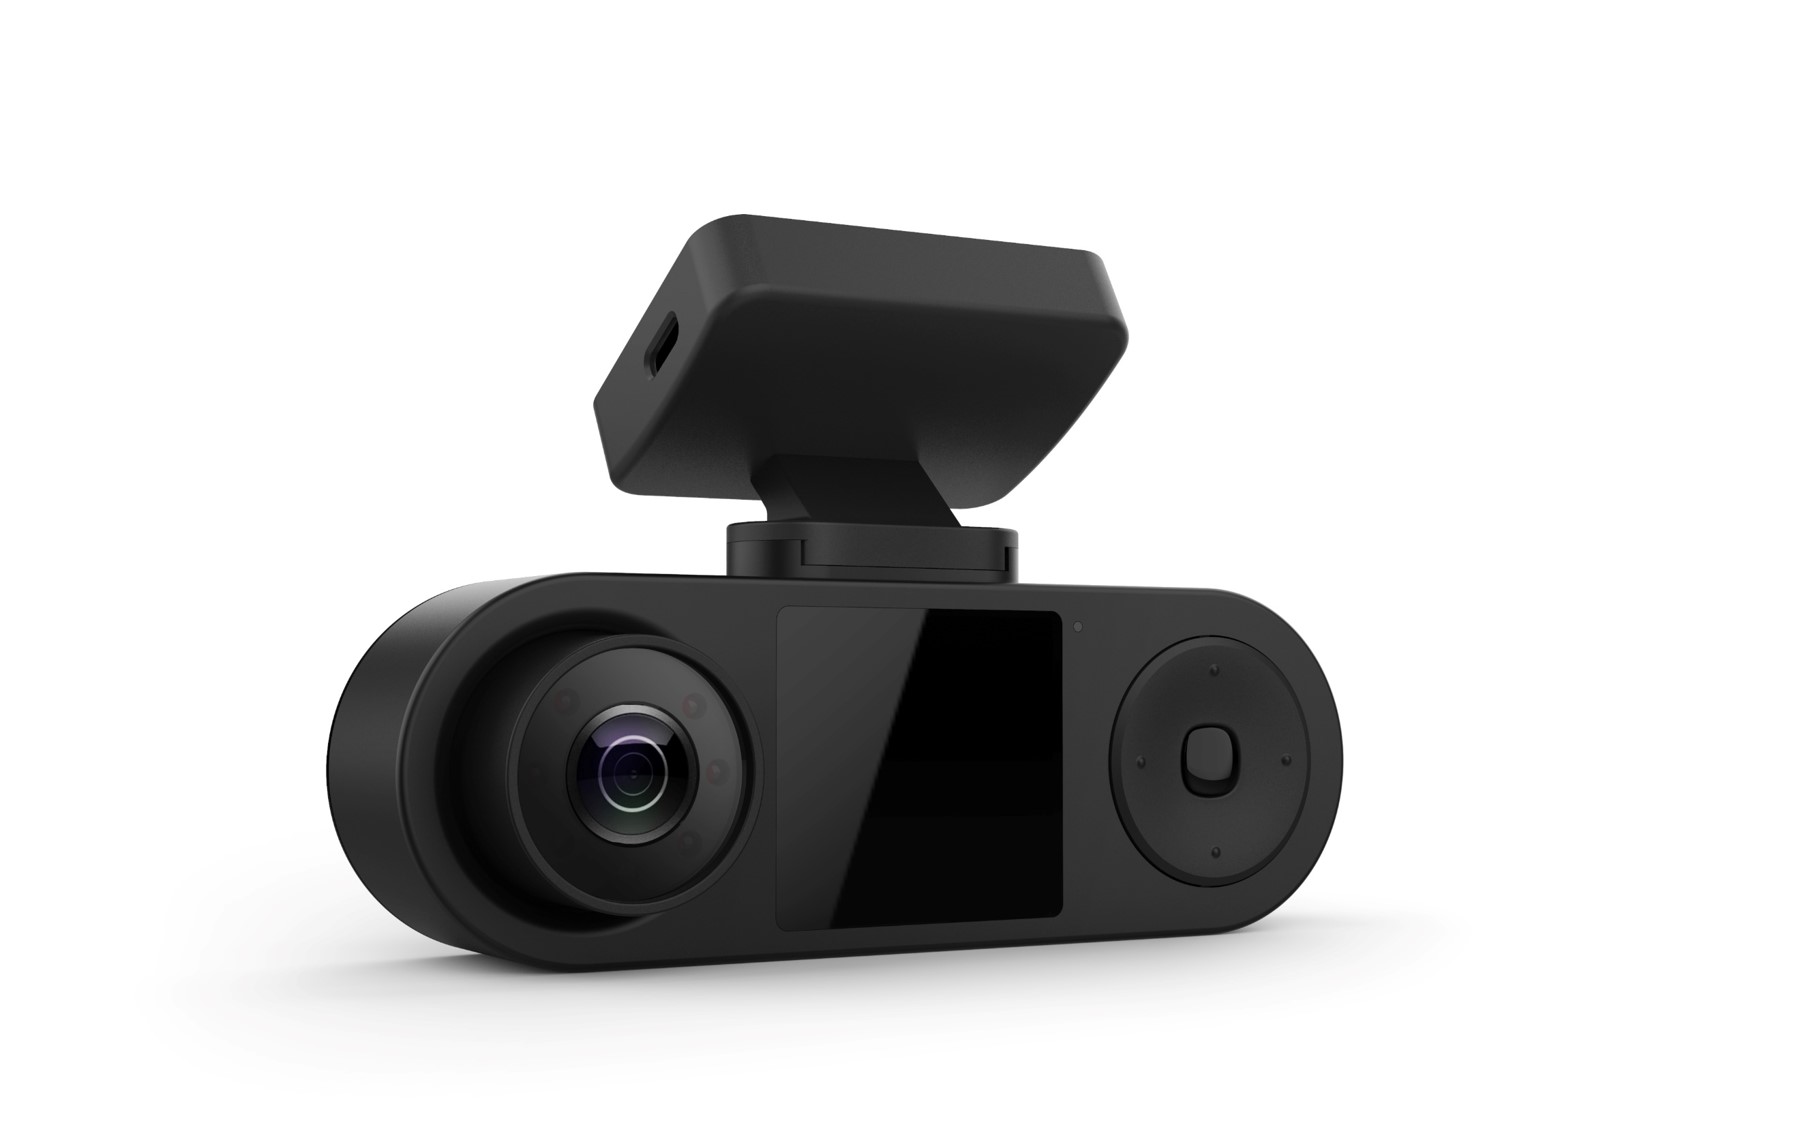 Review of the newest Coxpal A11T 3-Channel Dash Cam